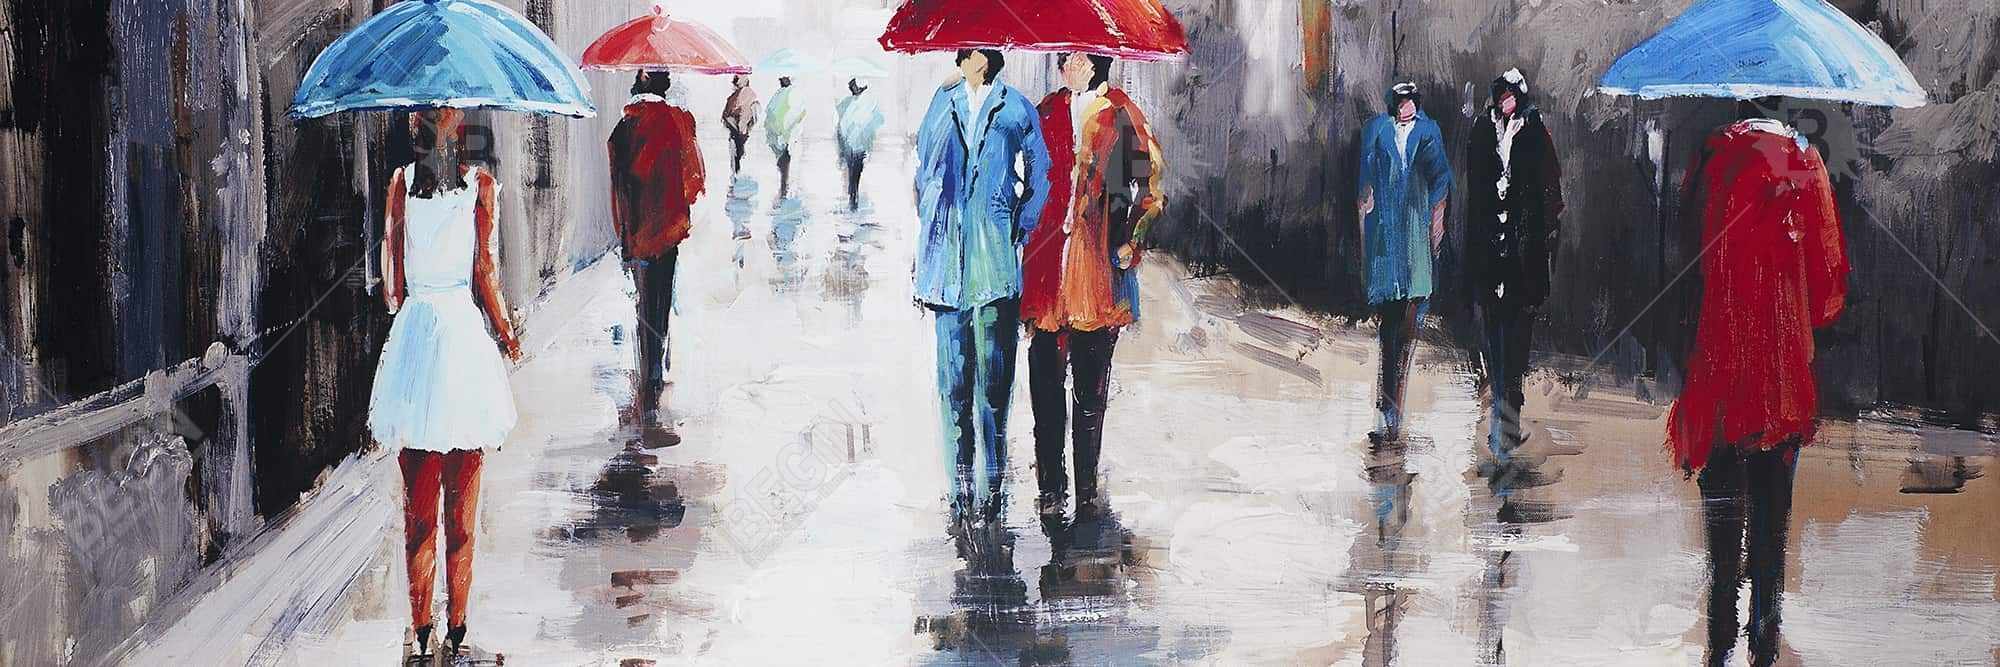 People with umbrellas in the street